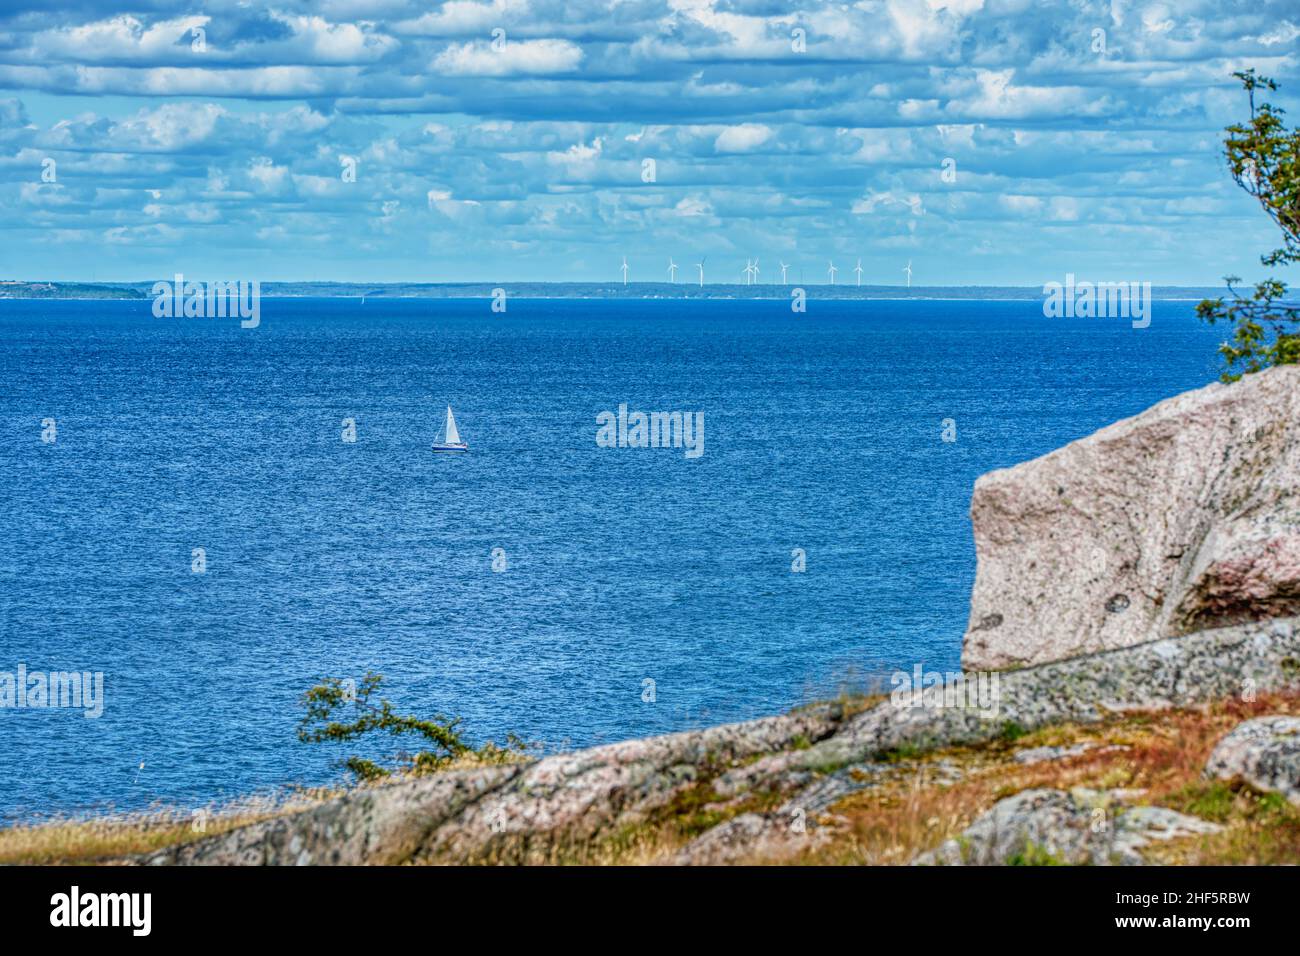 Faraway, small sailing boat or sailboat travelling solo at sea by the Isle of Hano, Sweden conveys peace or tranquility on a lone summer vacation Stock Photo